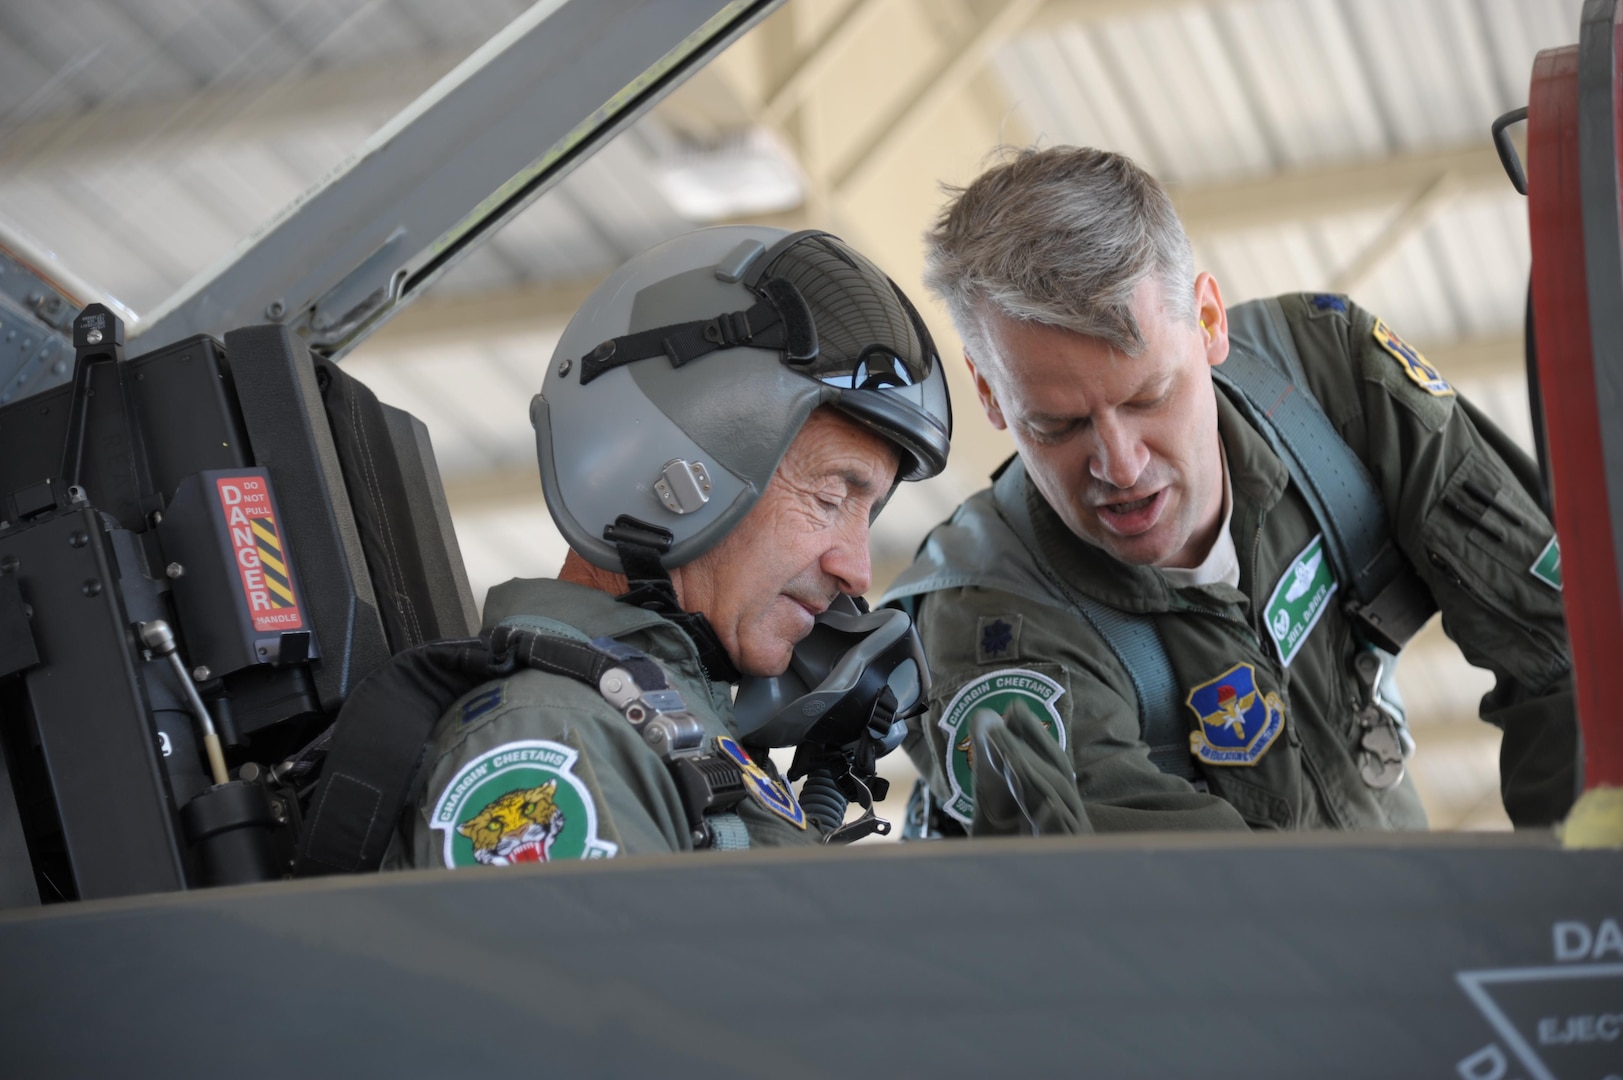 Lt. Col. Joel Deboer (right), 560th Flying Training Squadron commander, and Paul Granger, a former B-52 Stratofortress pilot who flew during the Vietnam War, prepare for takeoff during "Freedom Flight 196" at Joint Base San Antonio-Randolph, Texas March 3, 2016. The Freedom Flyer program was born in 1973 when the 560 FTS began retraining former prisoners of war to fly again in the Air Force.